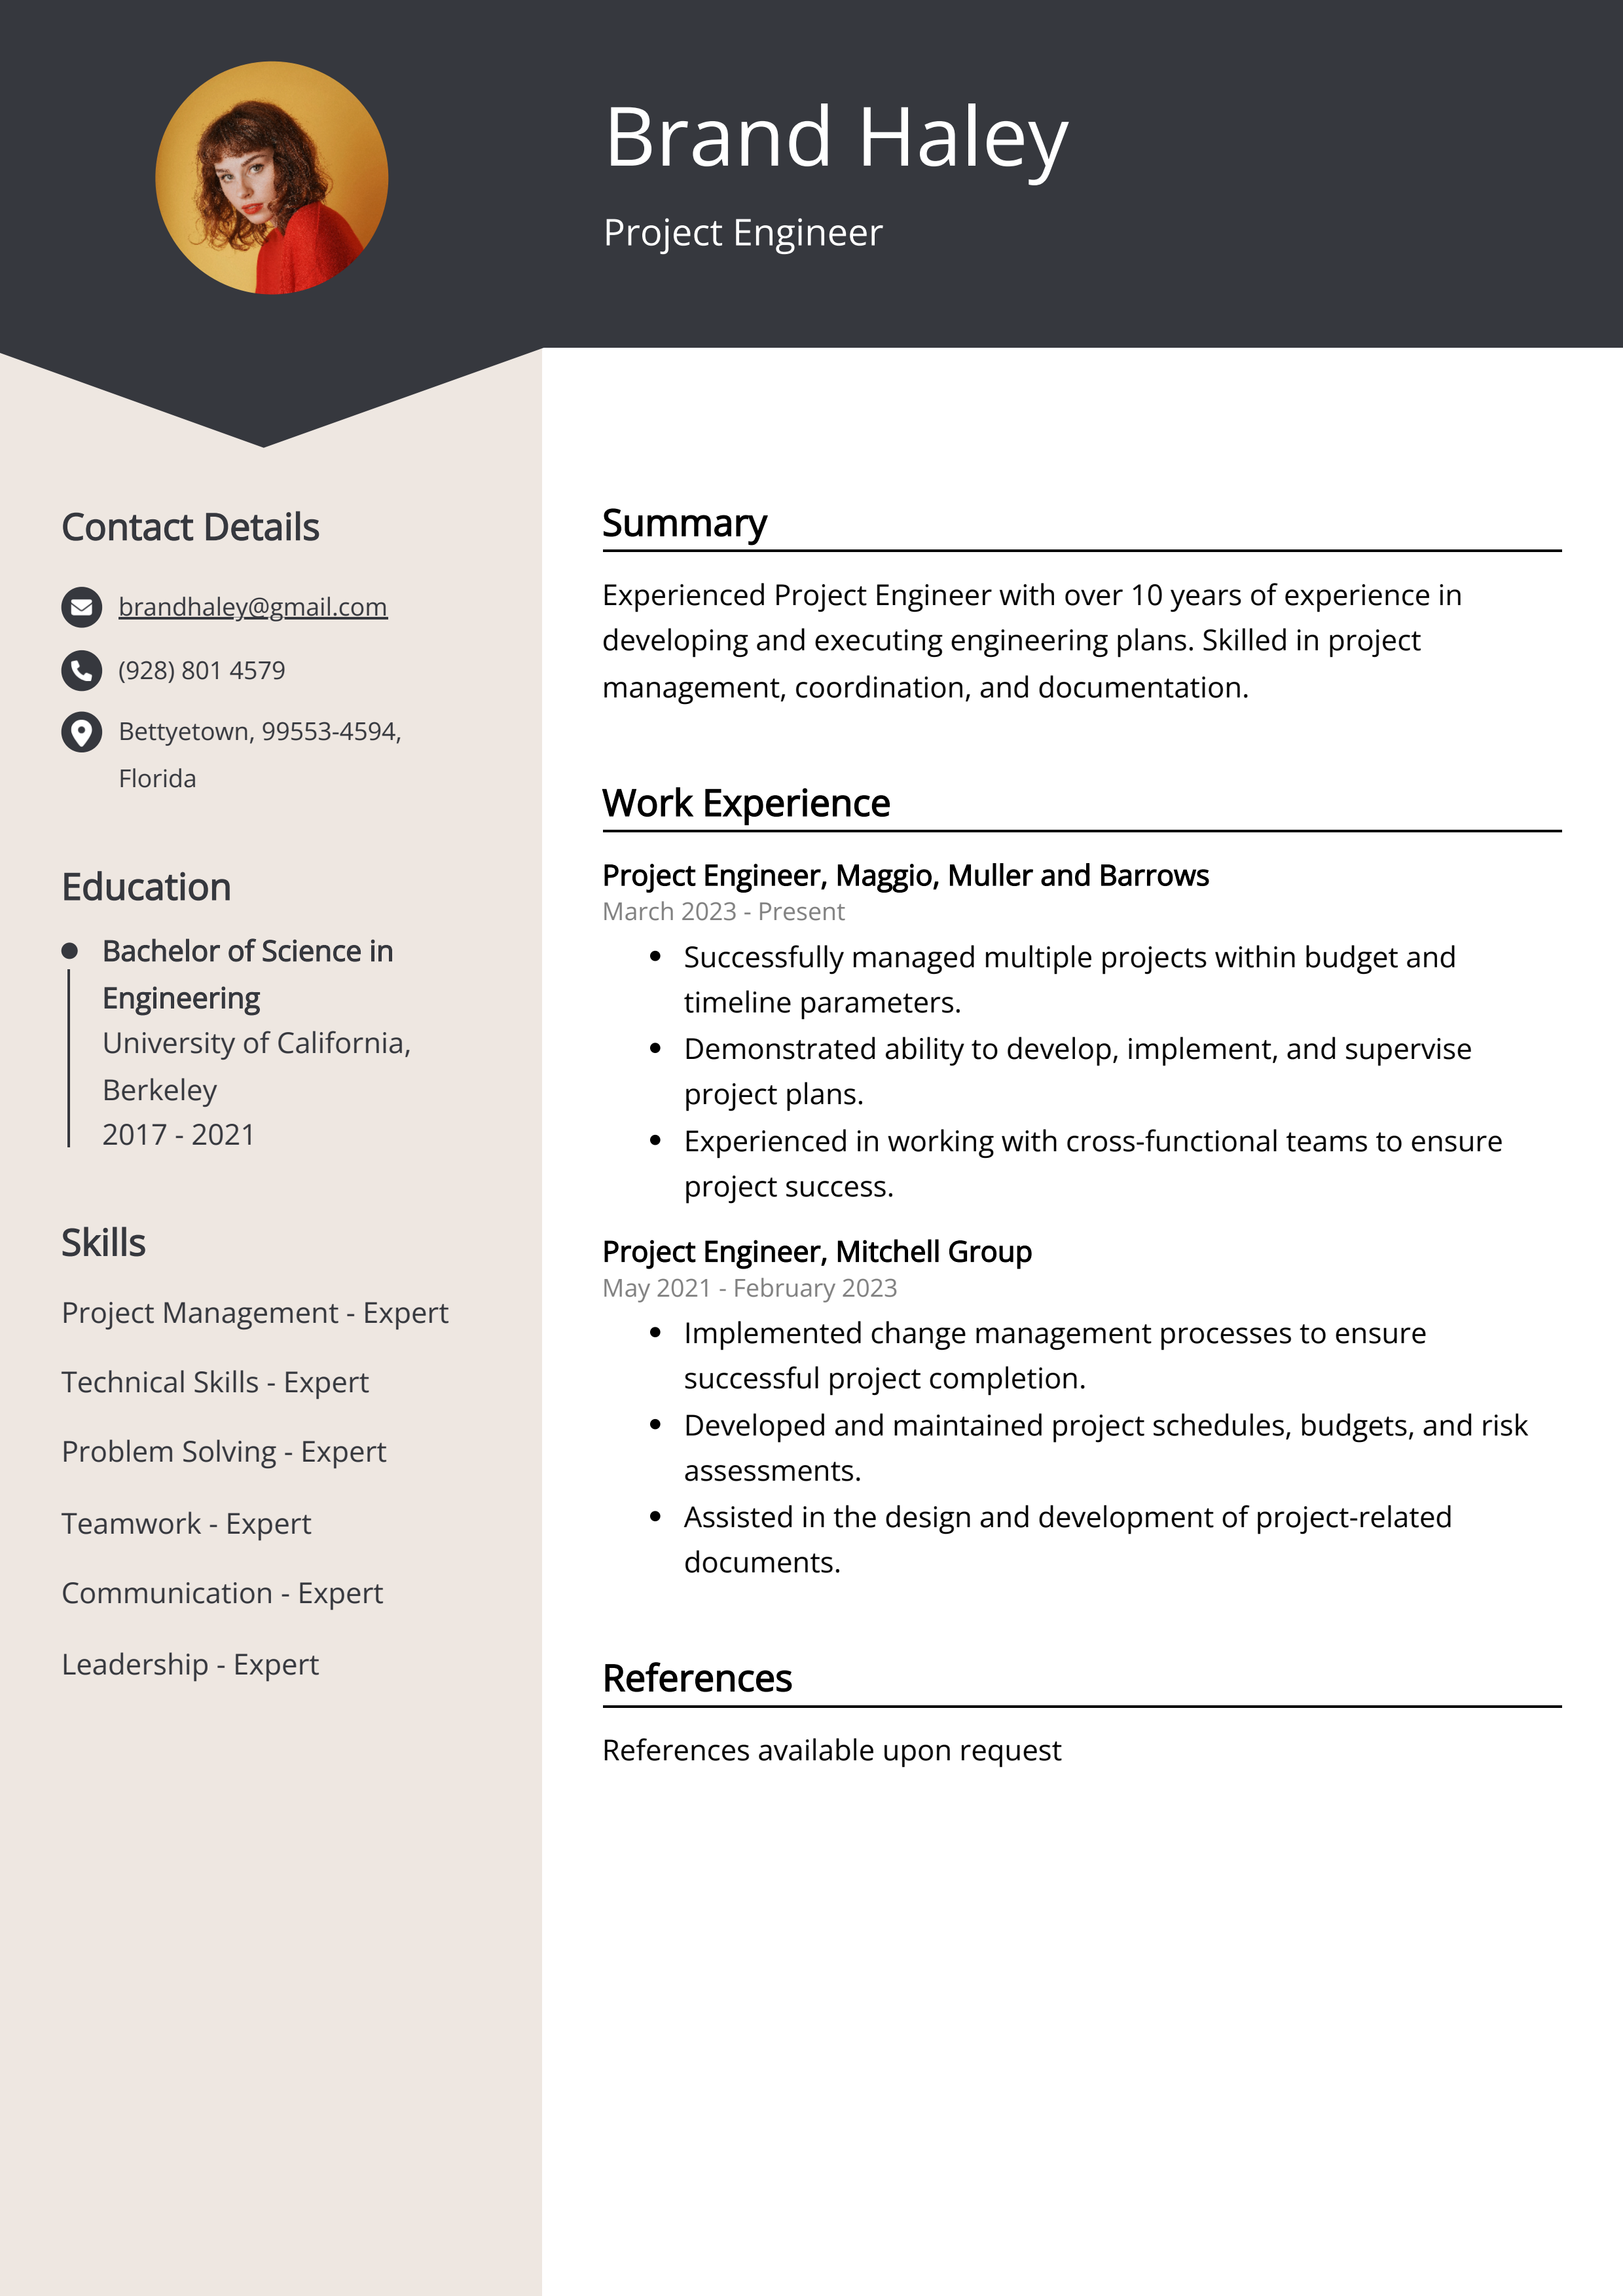 Project Engineer CV Example